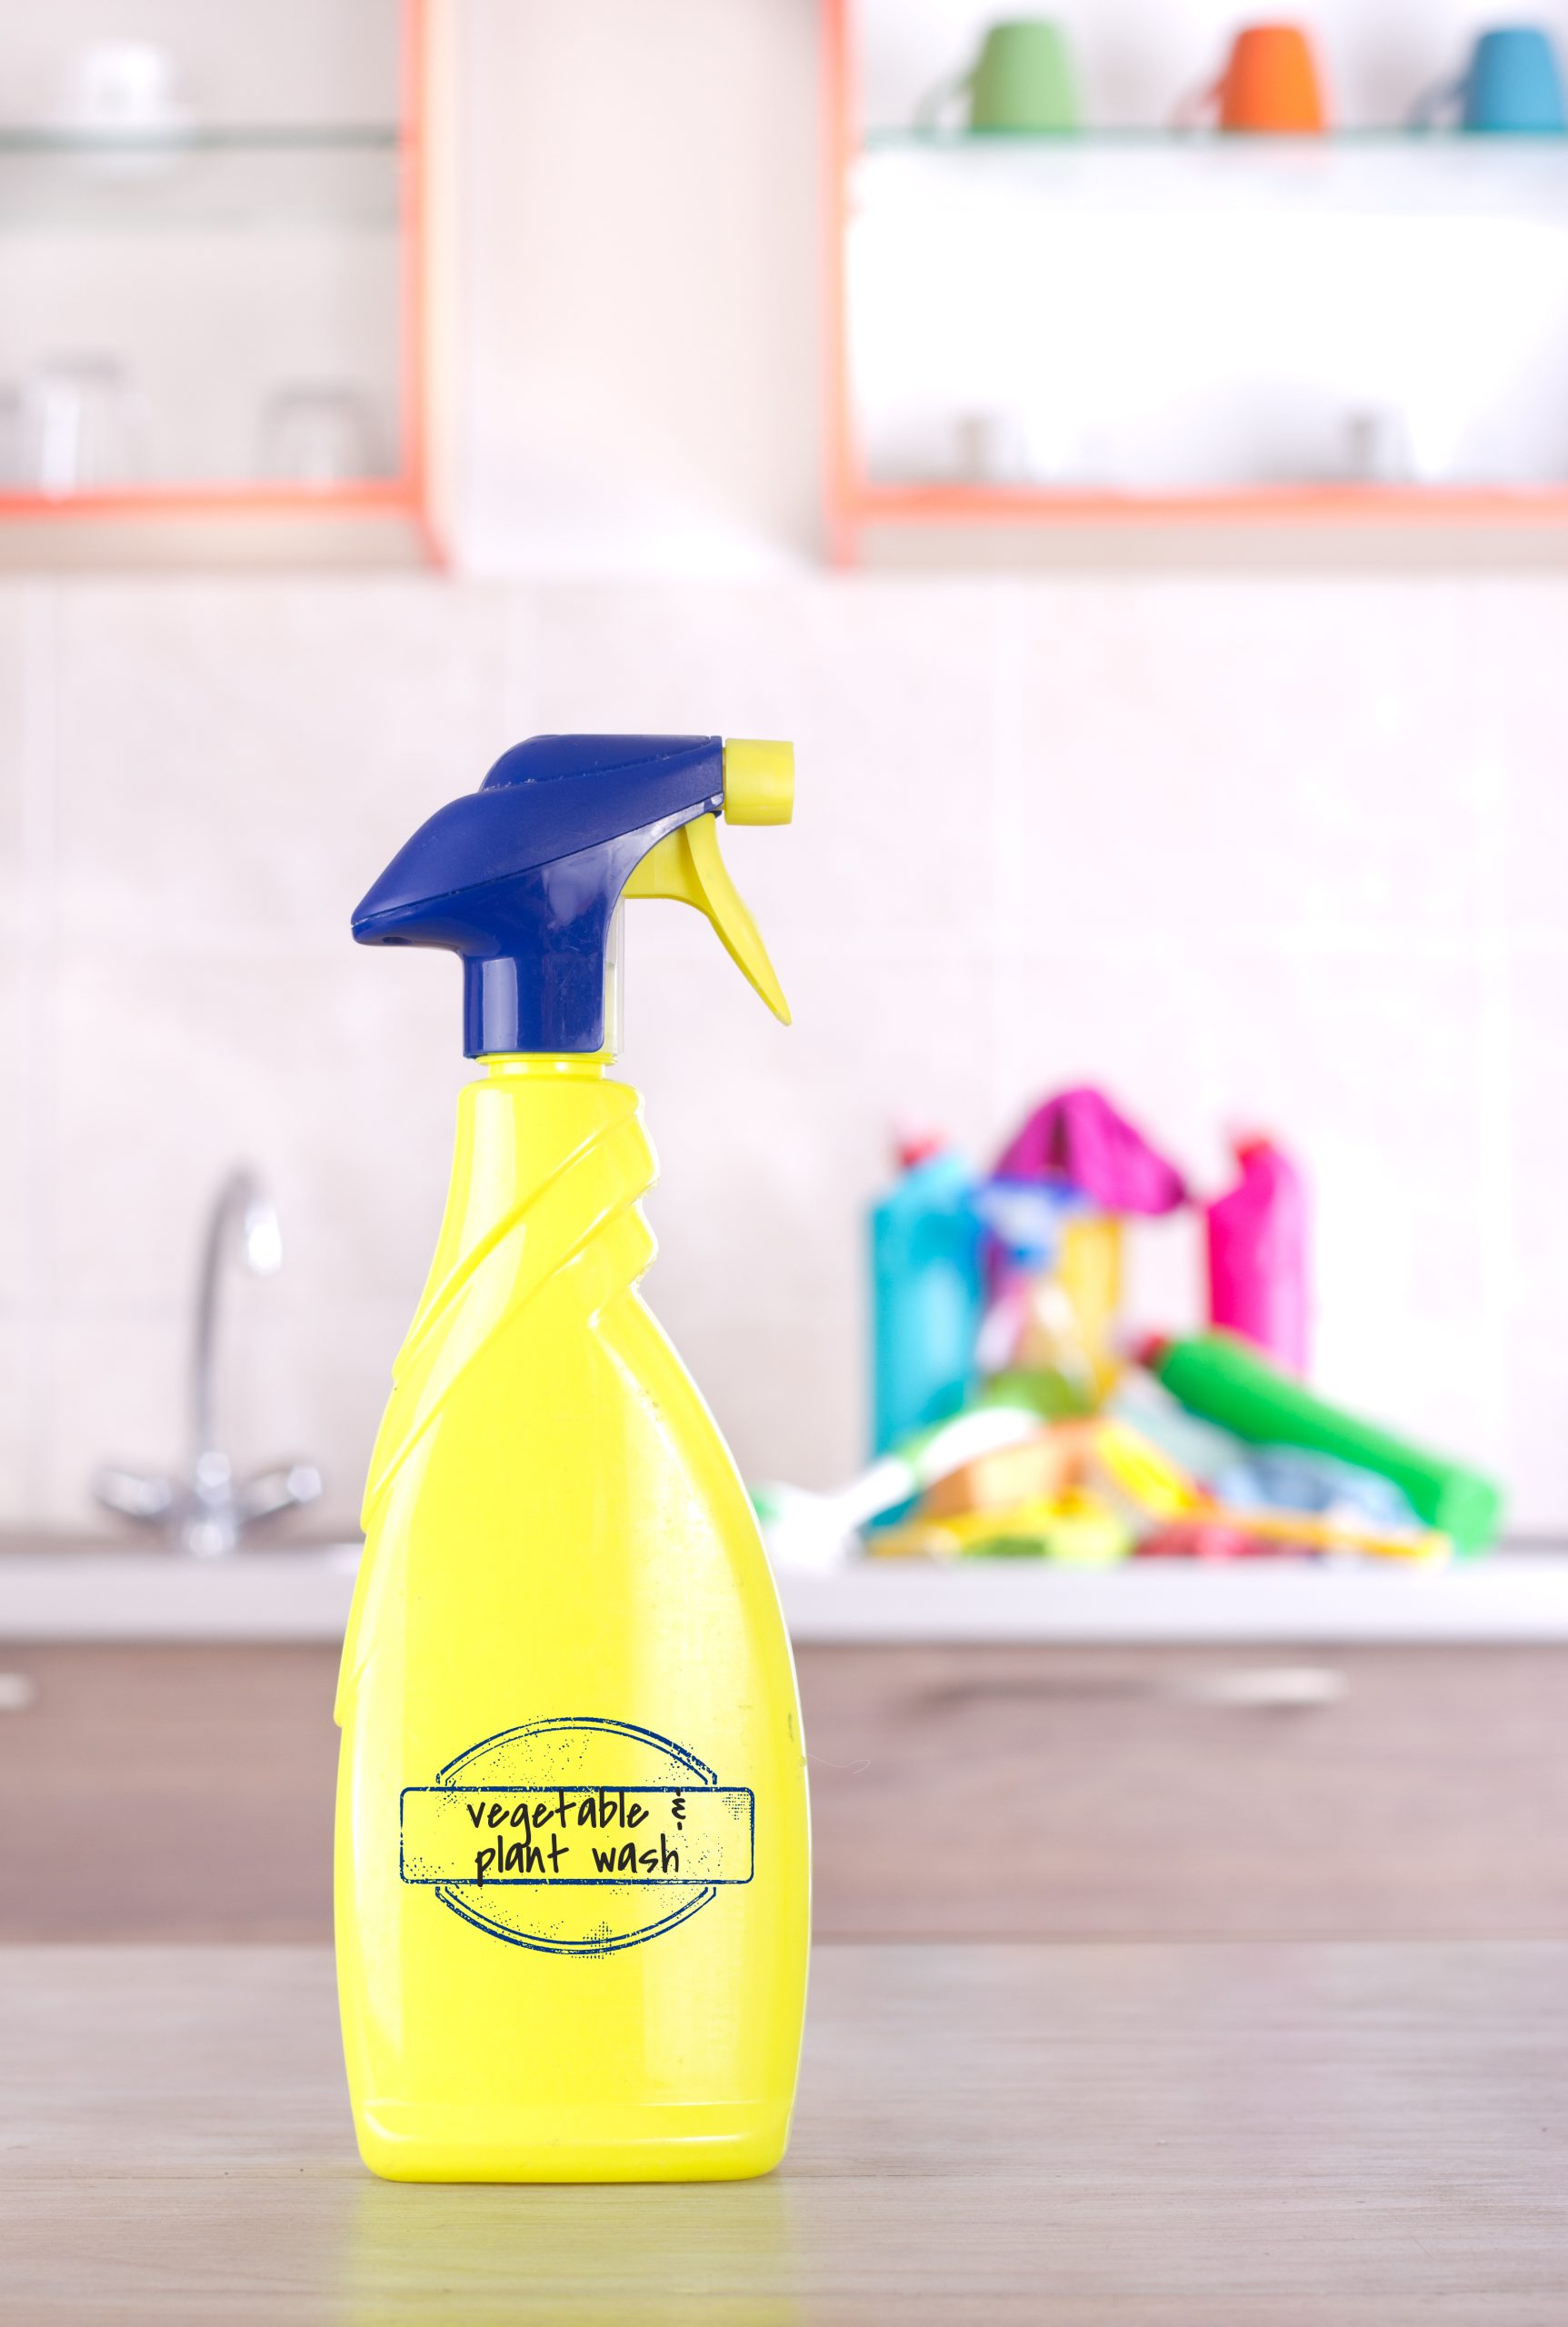 A yellow spray bottle labeled "Organic Pesticide" sits on a table in a kitchen.